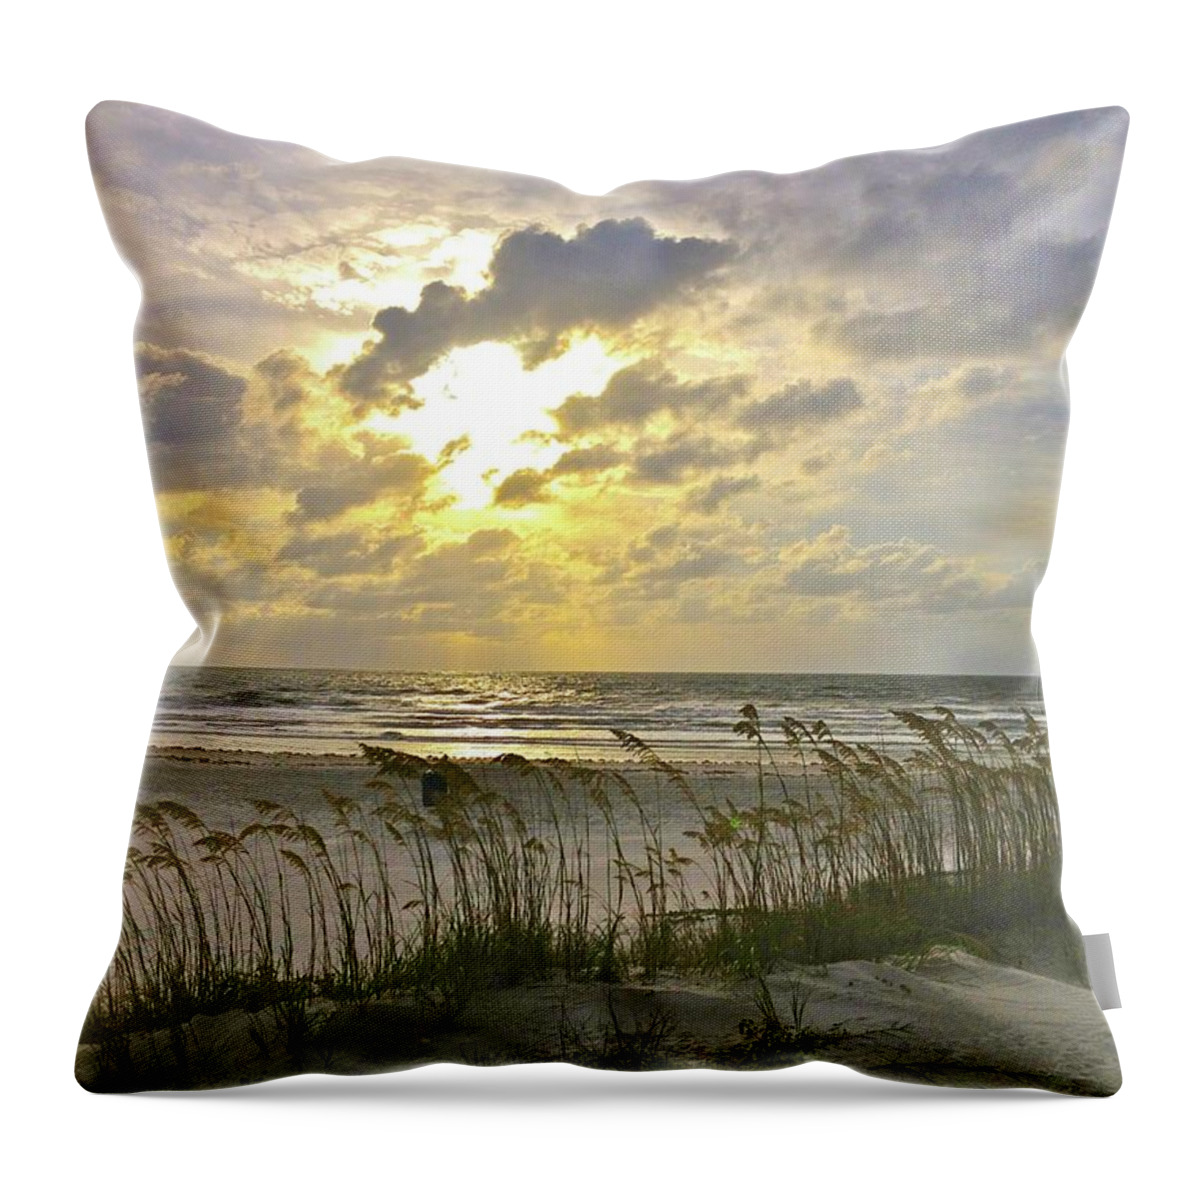 Morning Sunrise Throw Pillow featuring the photograph Sunrise Seaoats by Laurie Hein